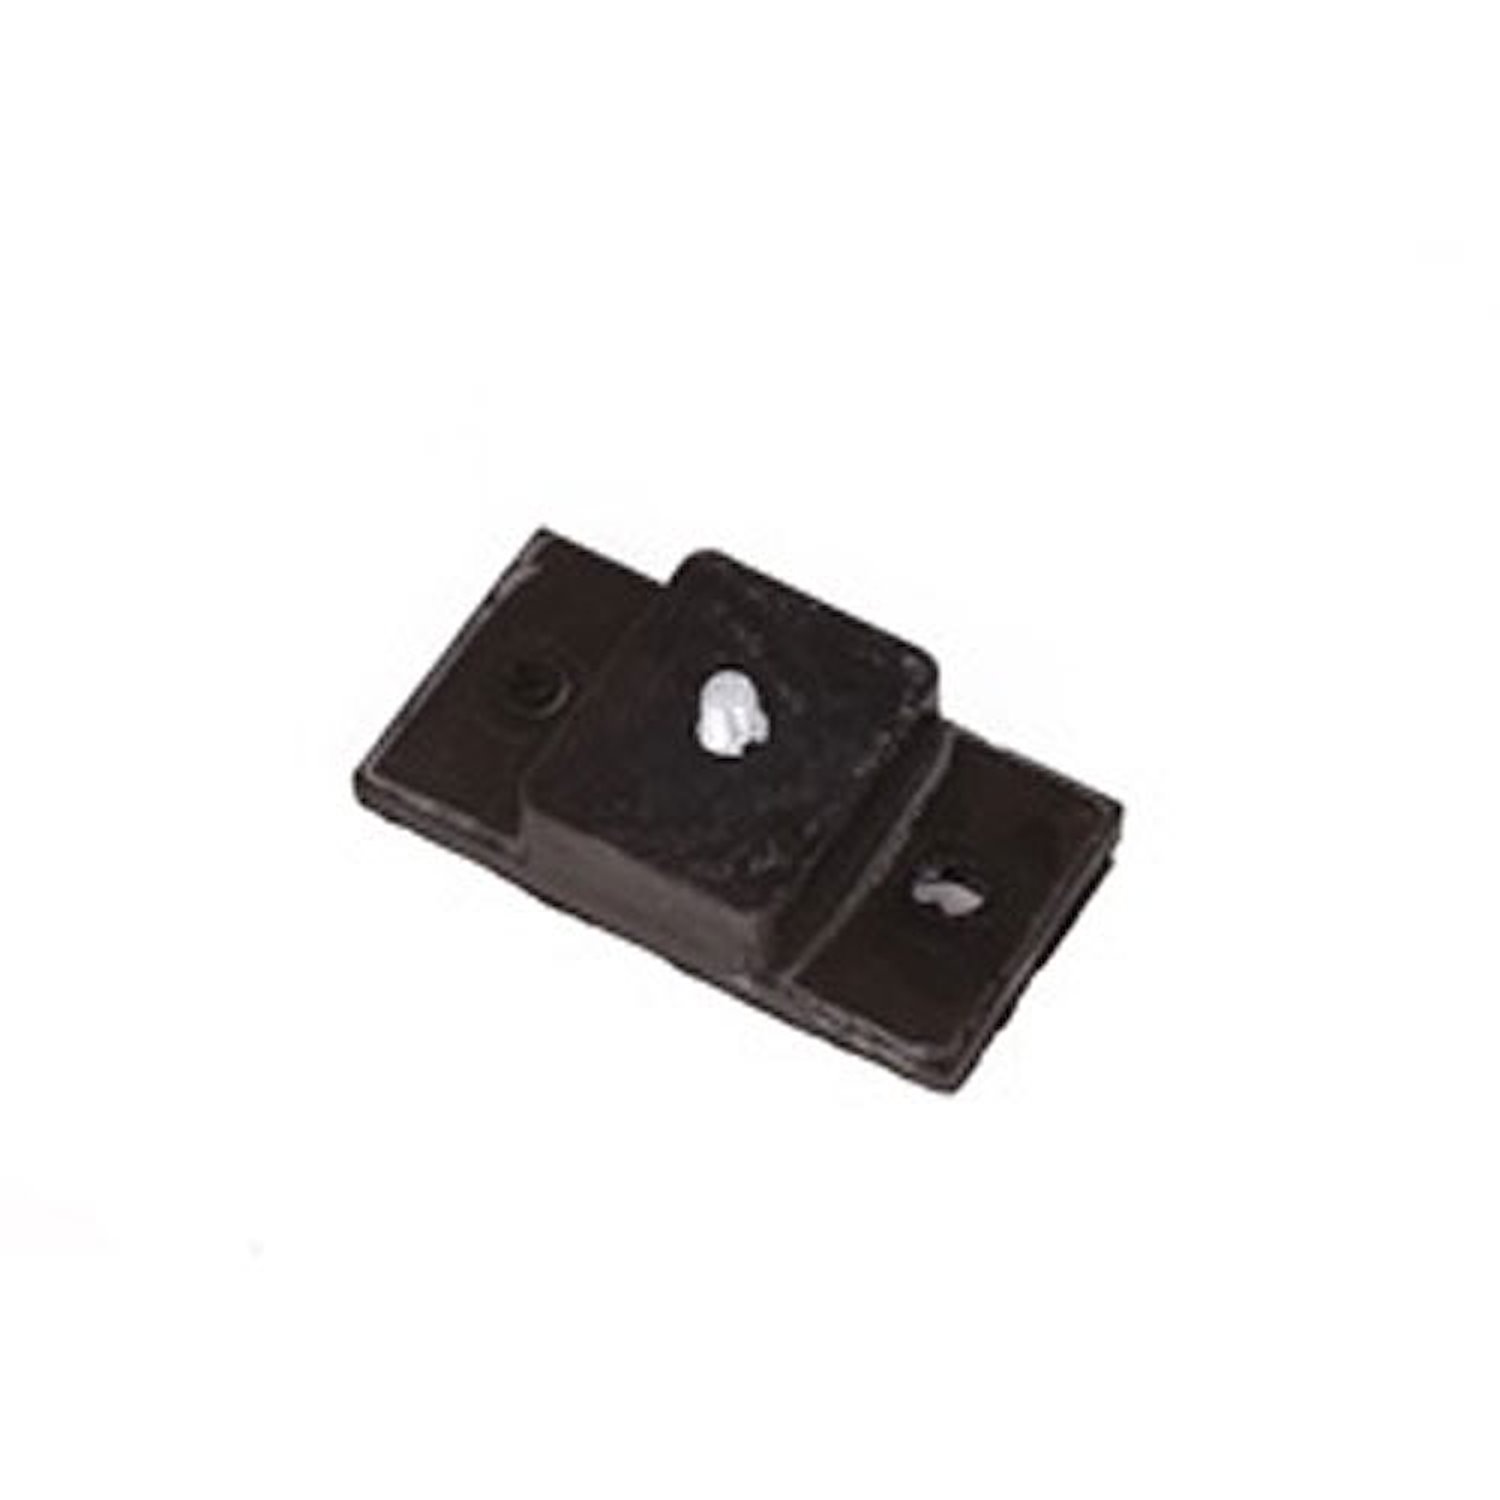 This radiator isolator pad from Omix-ADA fits 87-01 Jeep Cherokee and 87-92 Comanches.